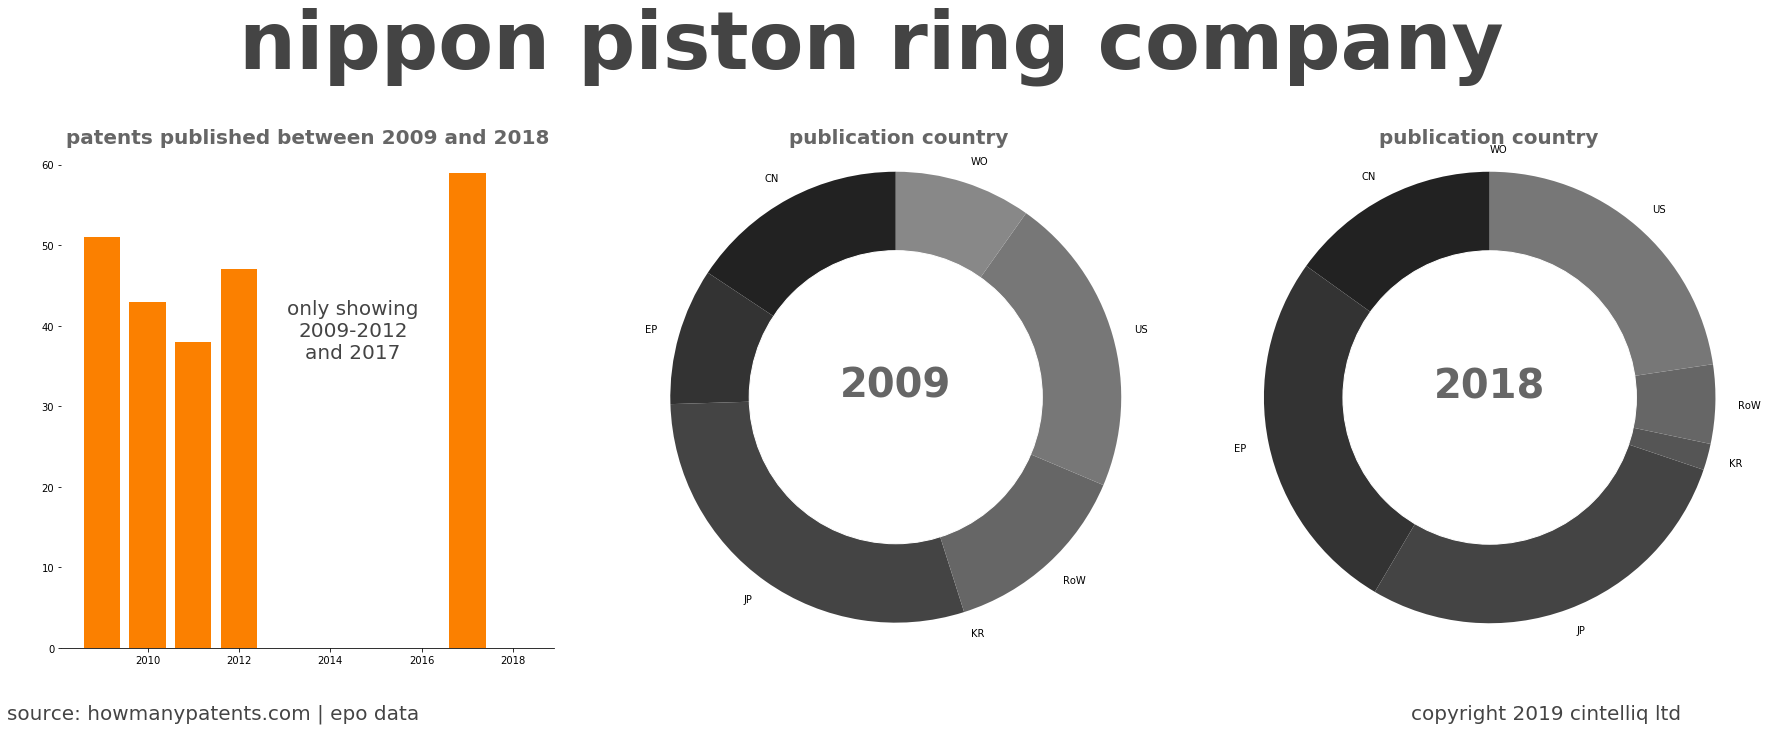 summary of patents for Nippon Piston Ring Company